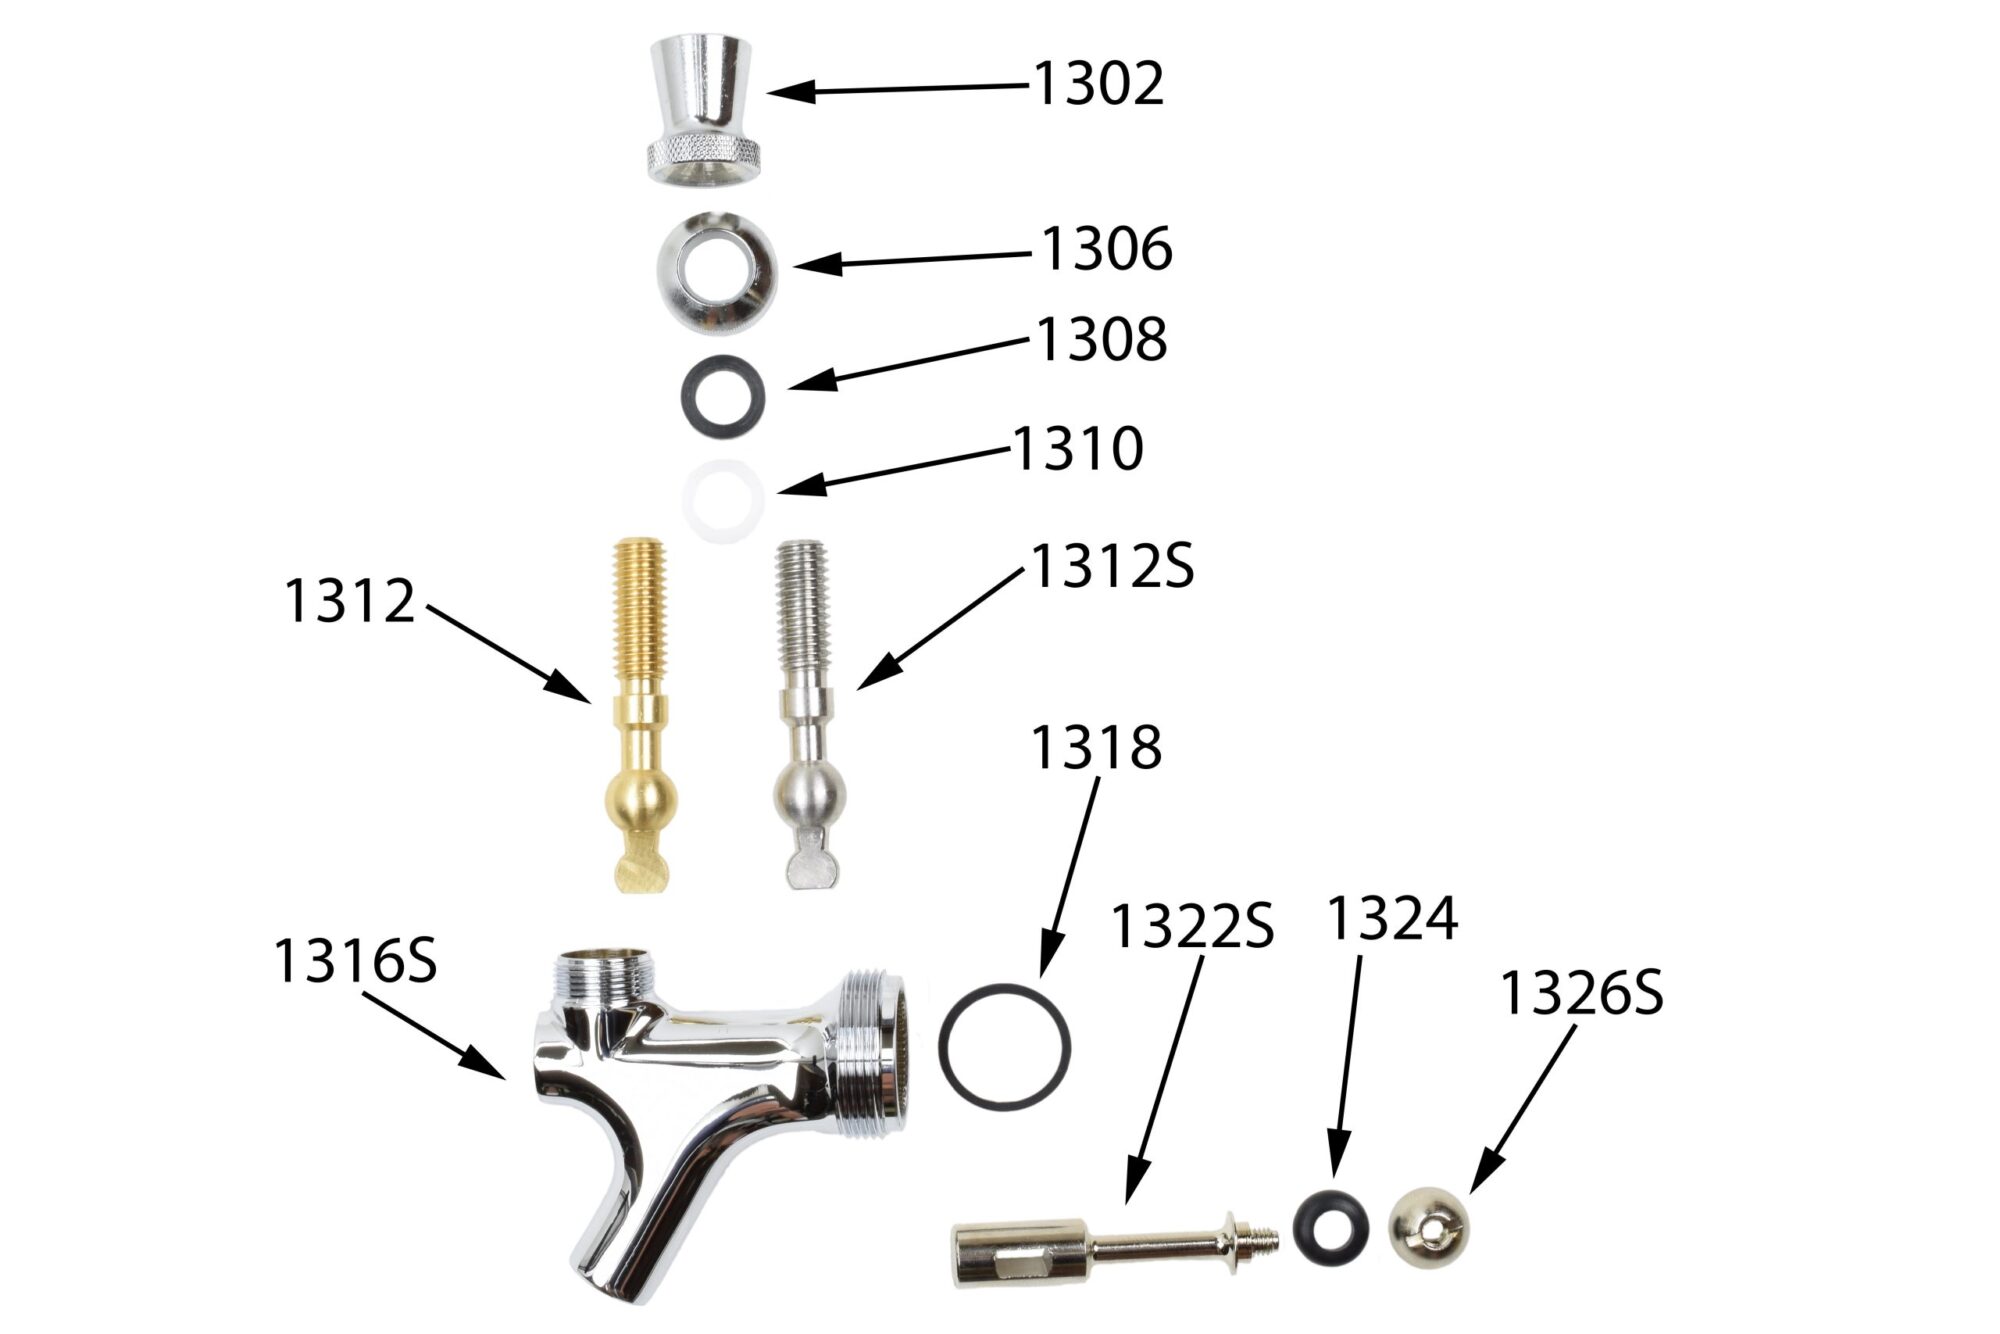 Faucet-Schematic-SS - 1326S